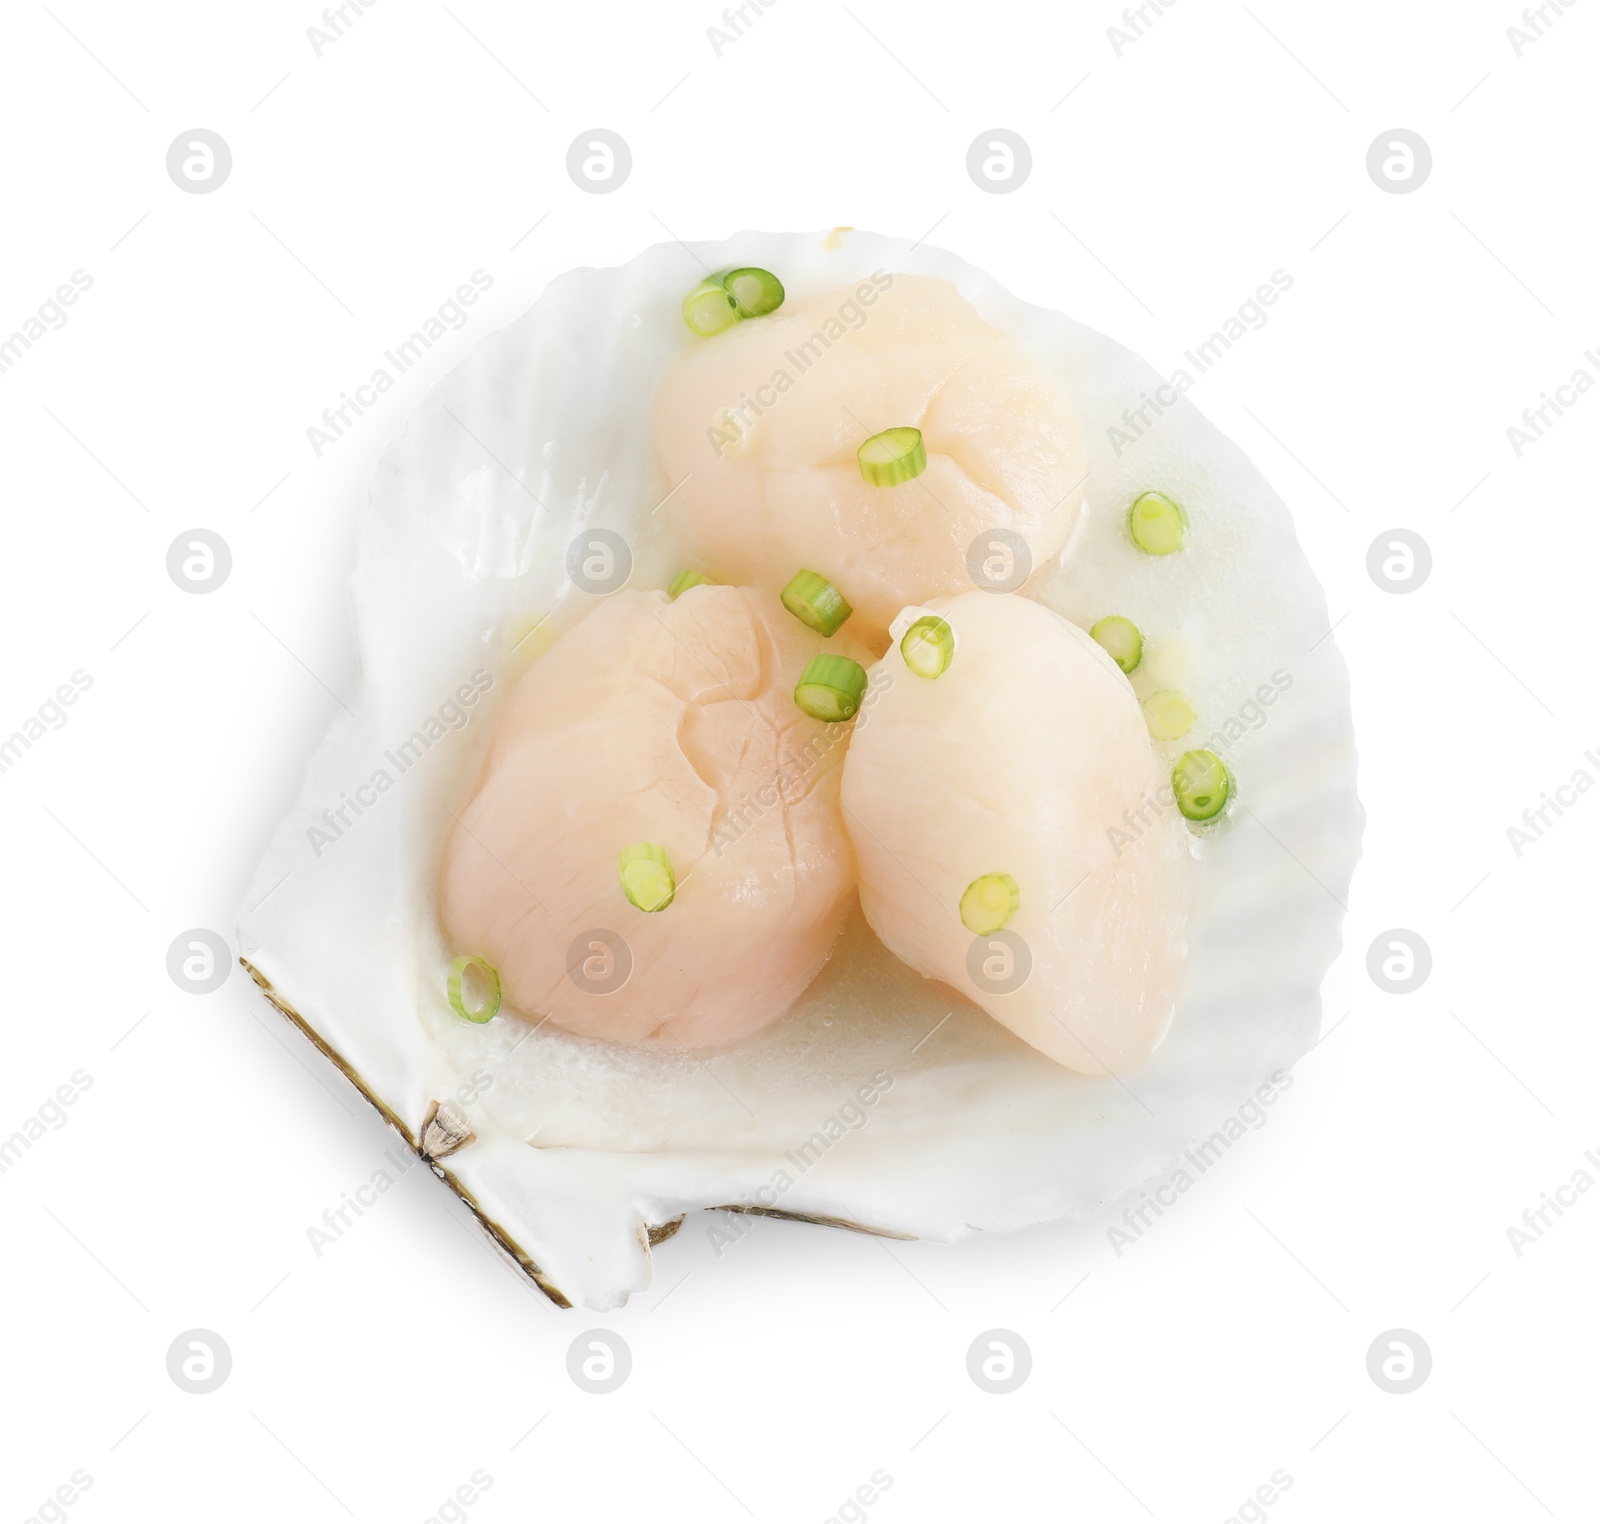 Photo of Raw scallops with green onion and shell isolated on white, top view